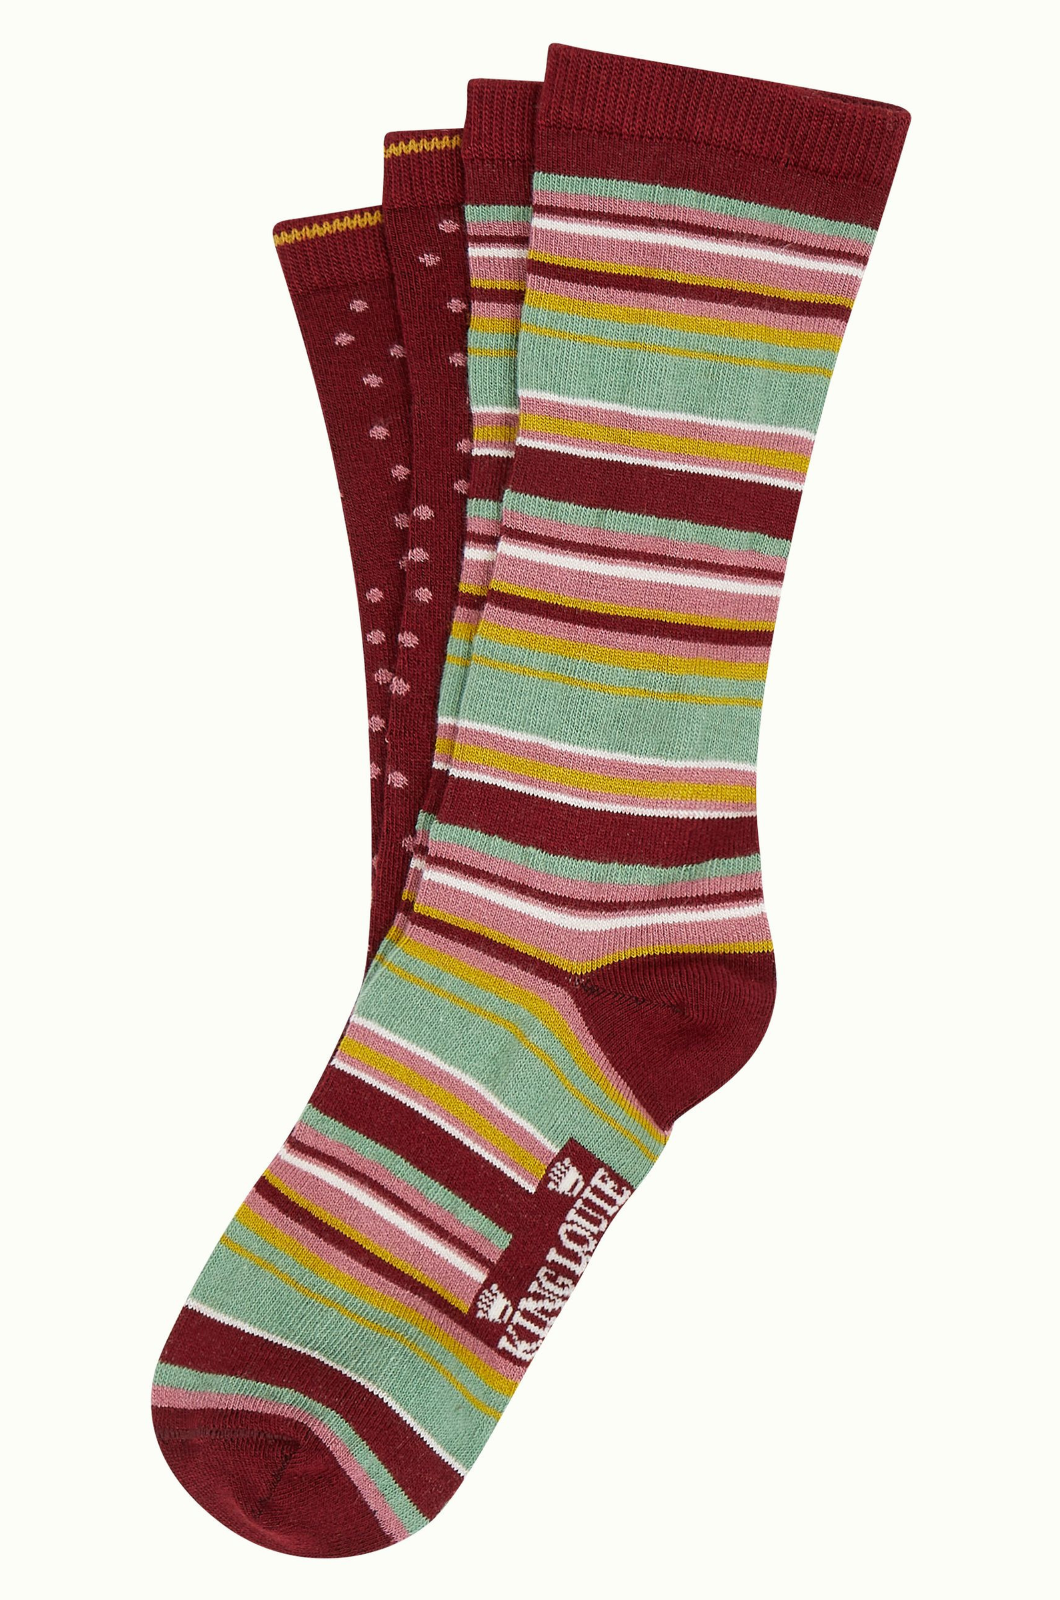 King Louie Giftbox Socks Quentin in Cabernet Red